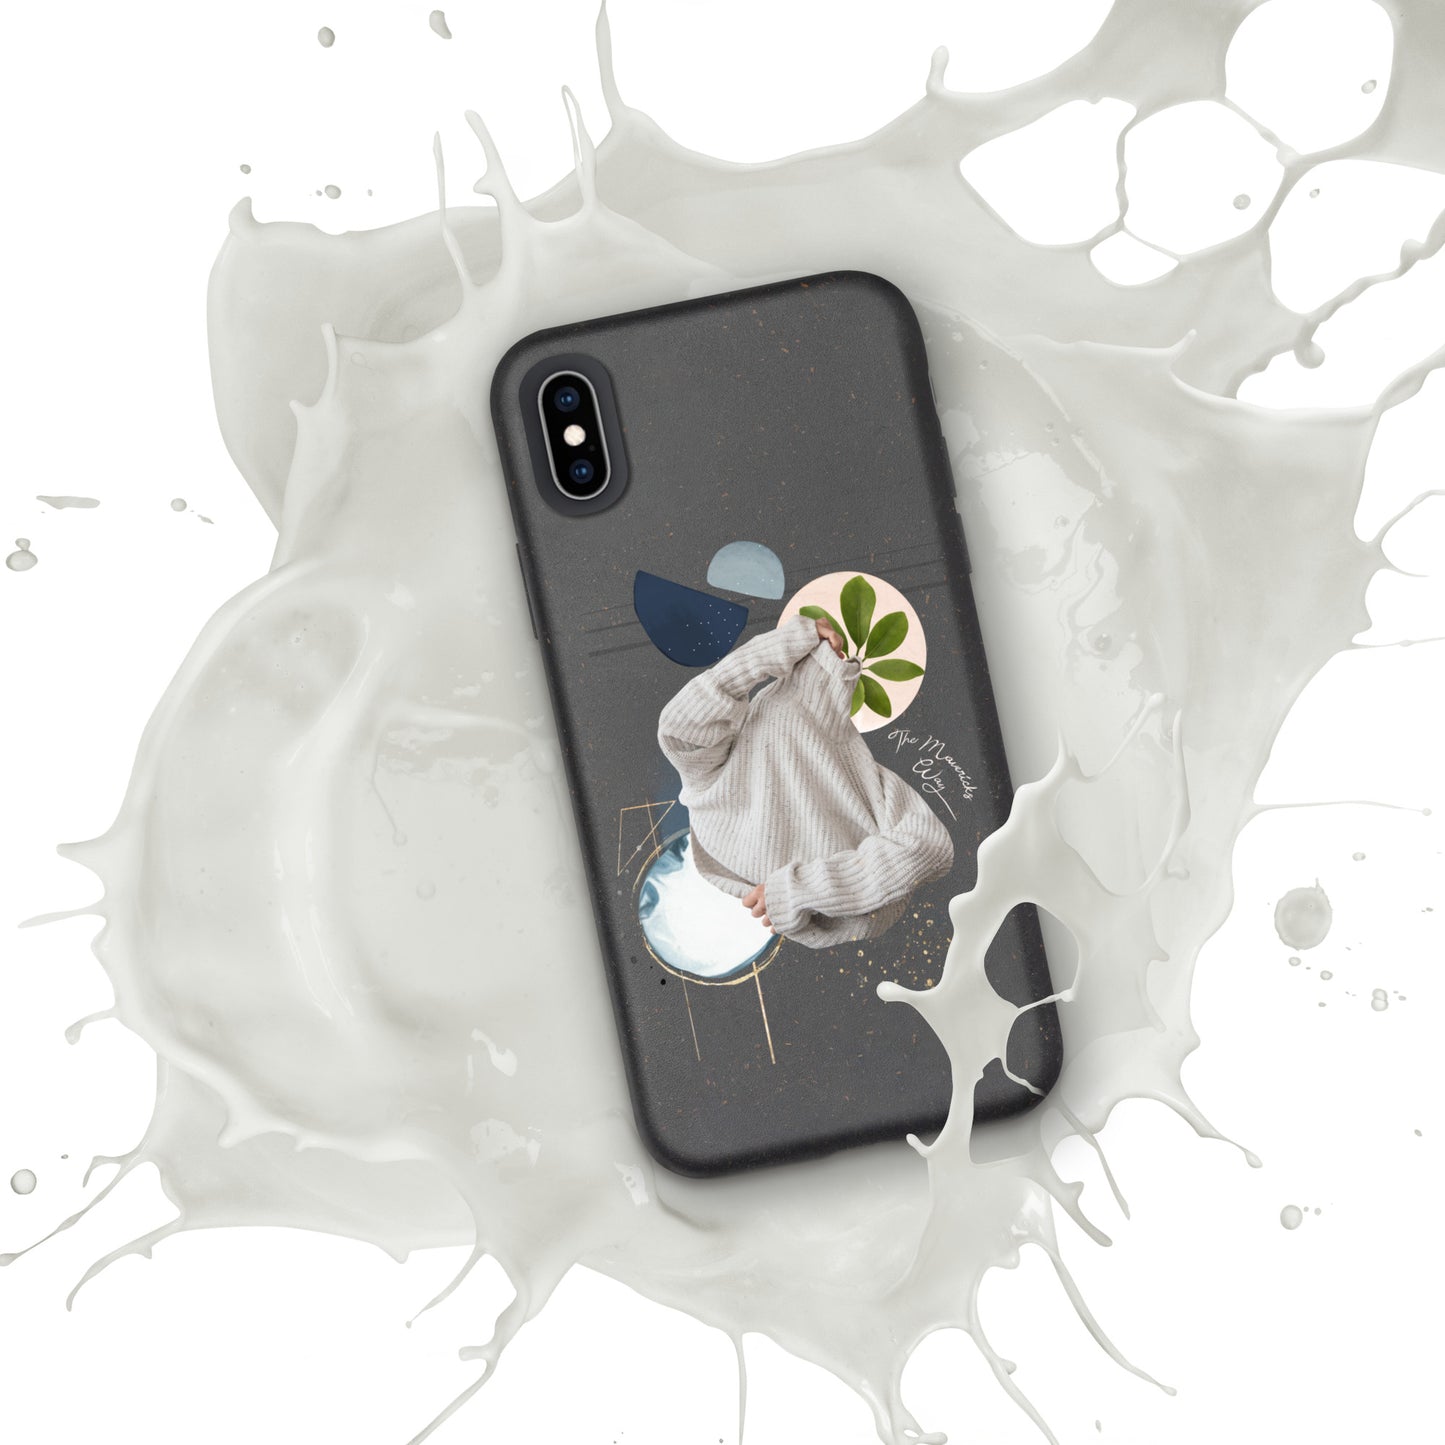 TIME FOR CHANGE iPhone case